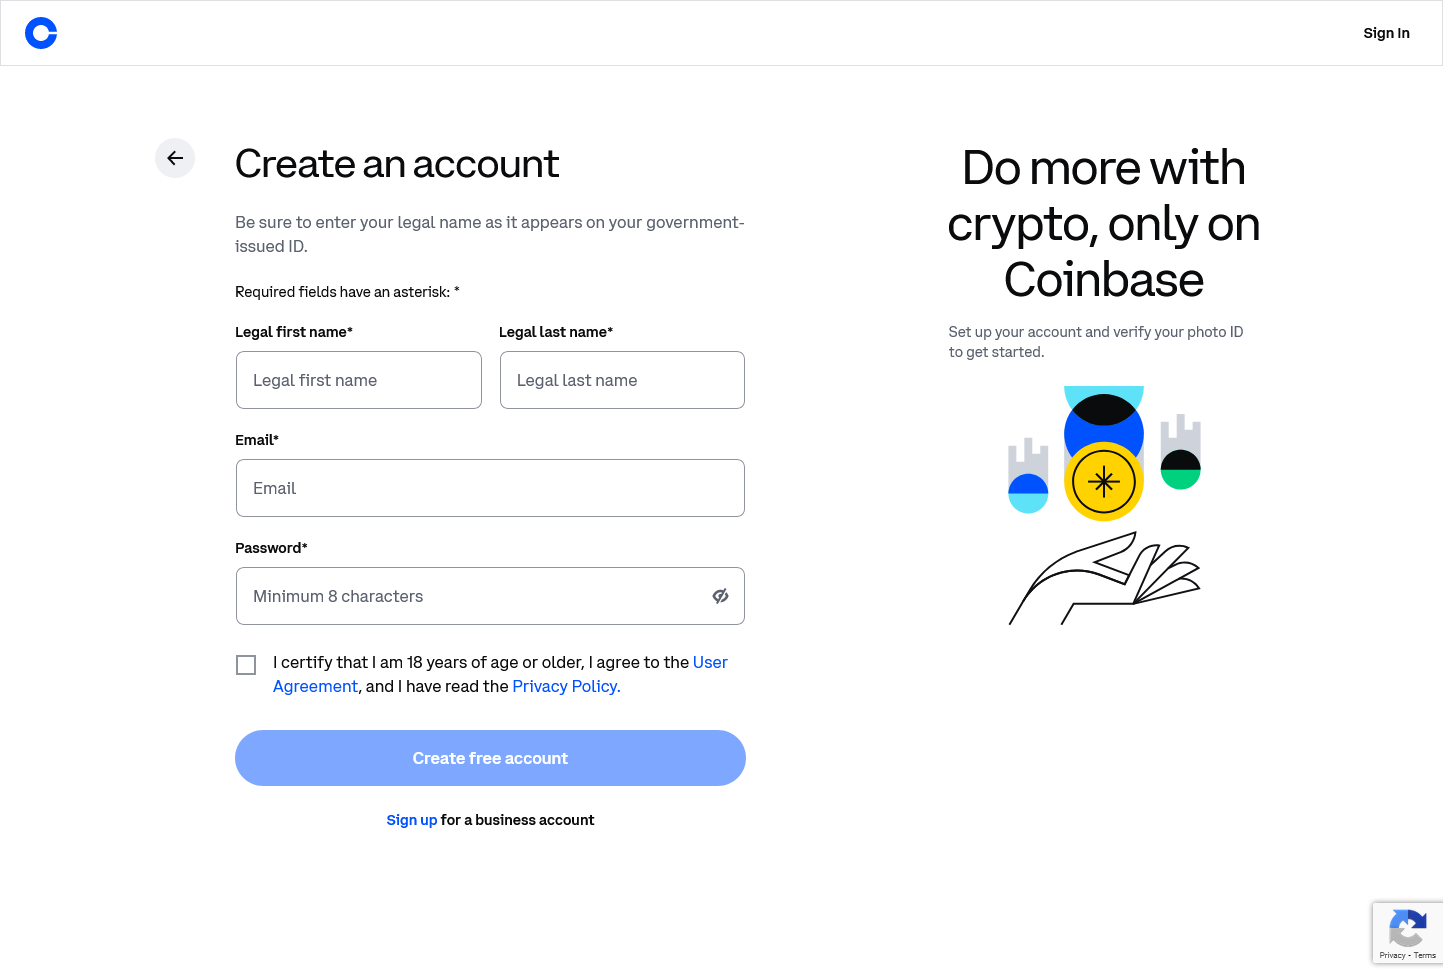 Step 1: Sign Up to Coinbase